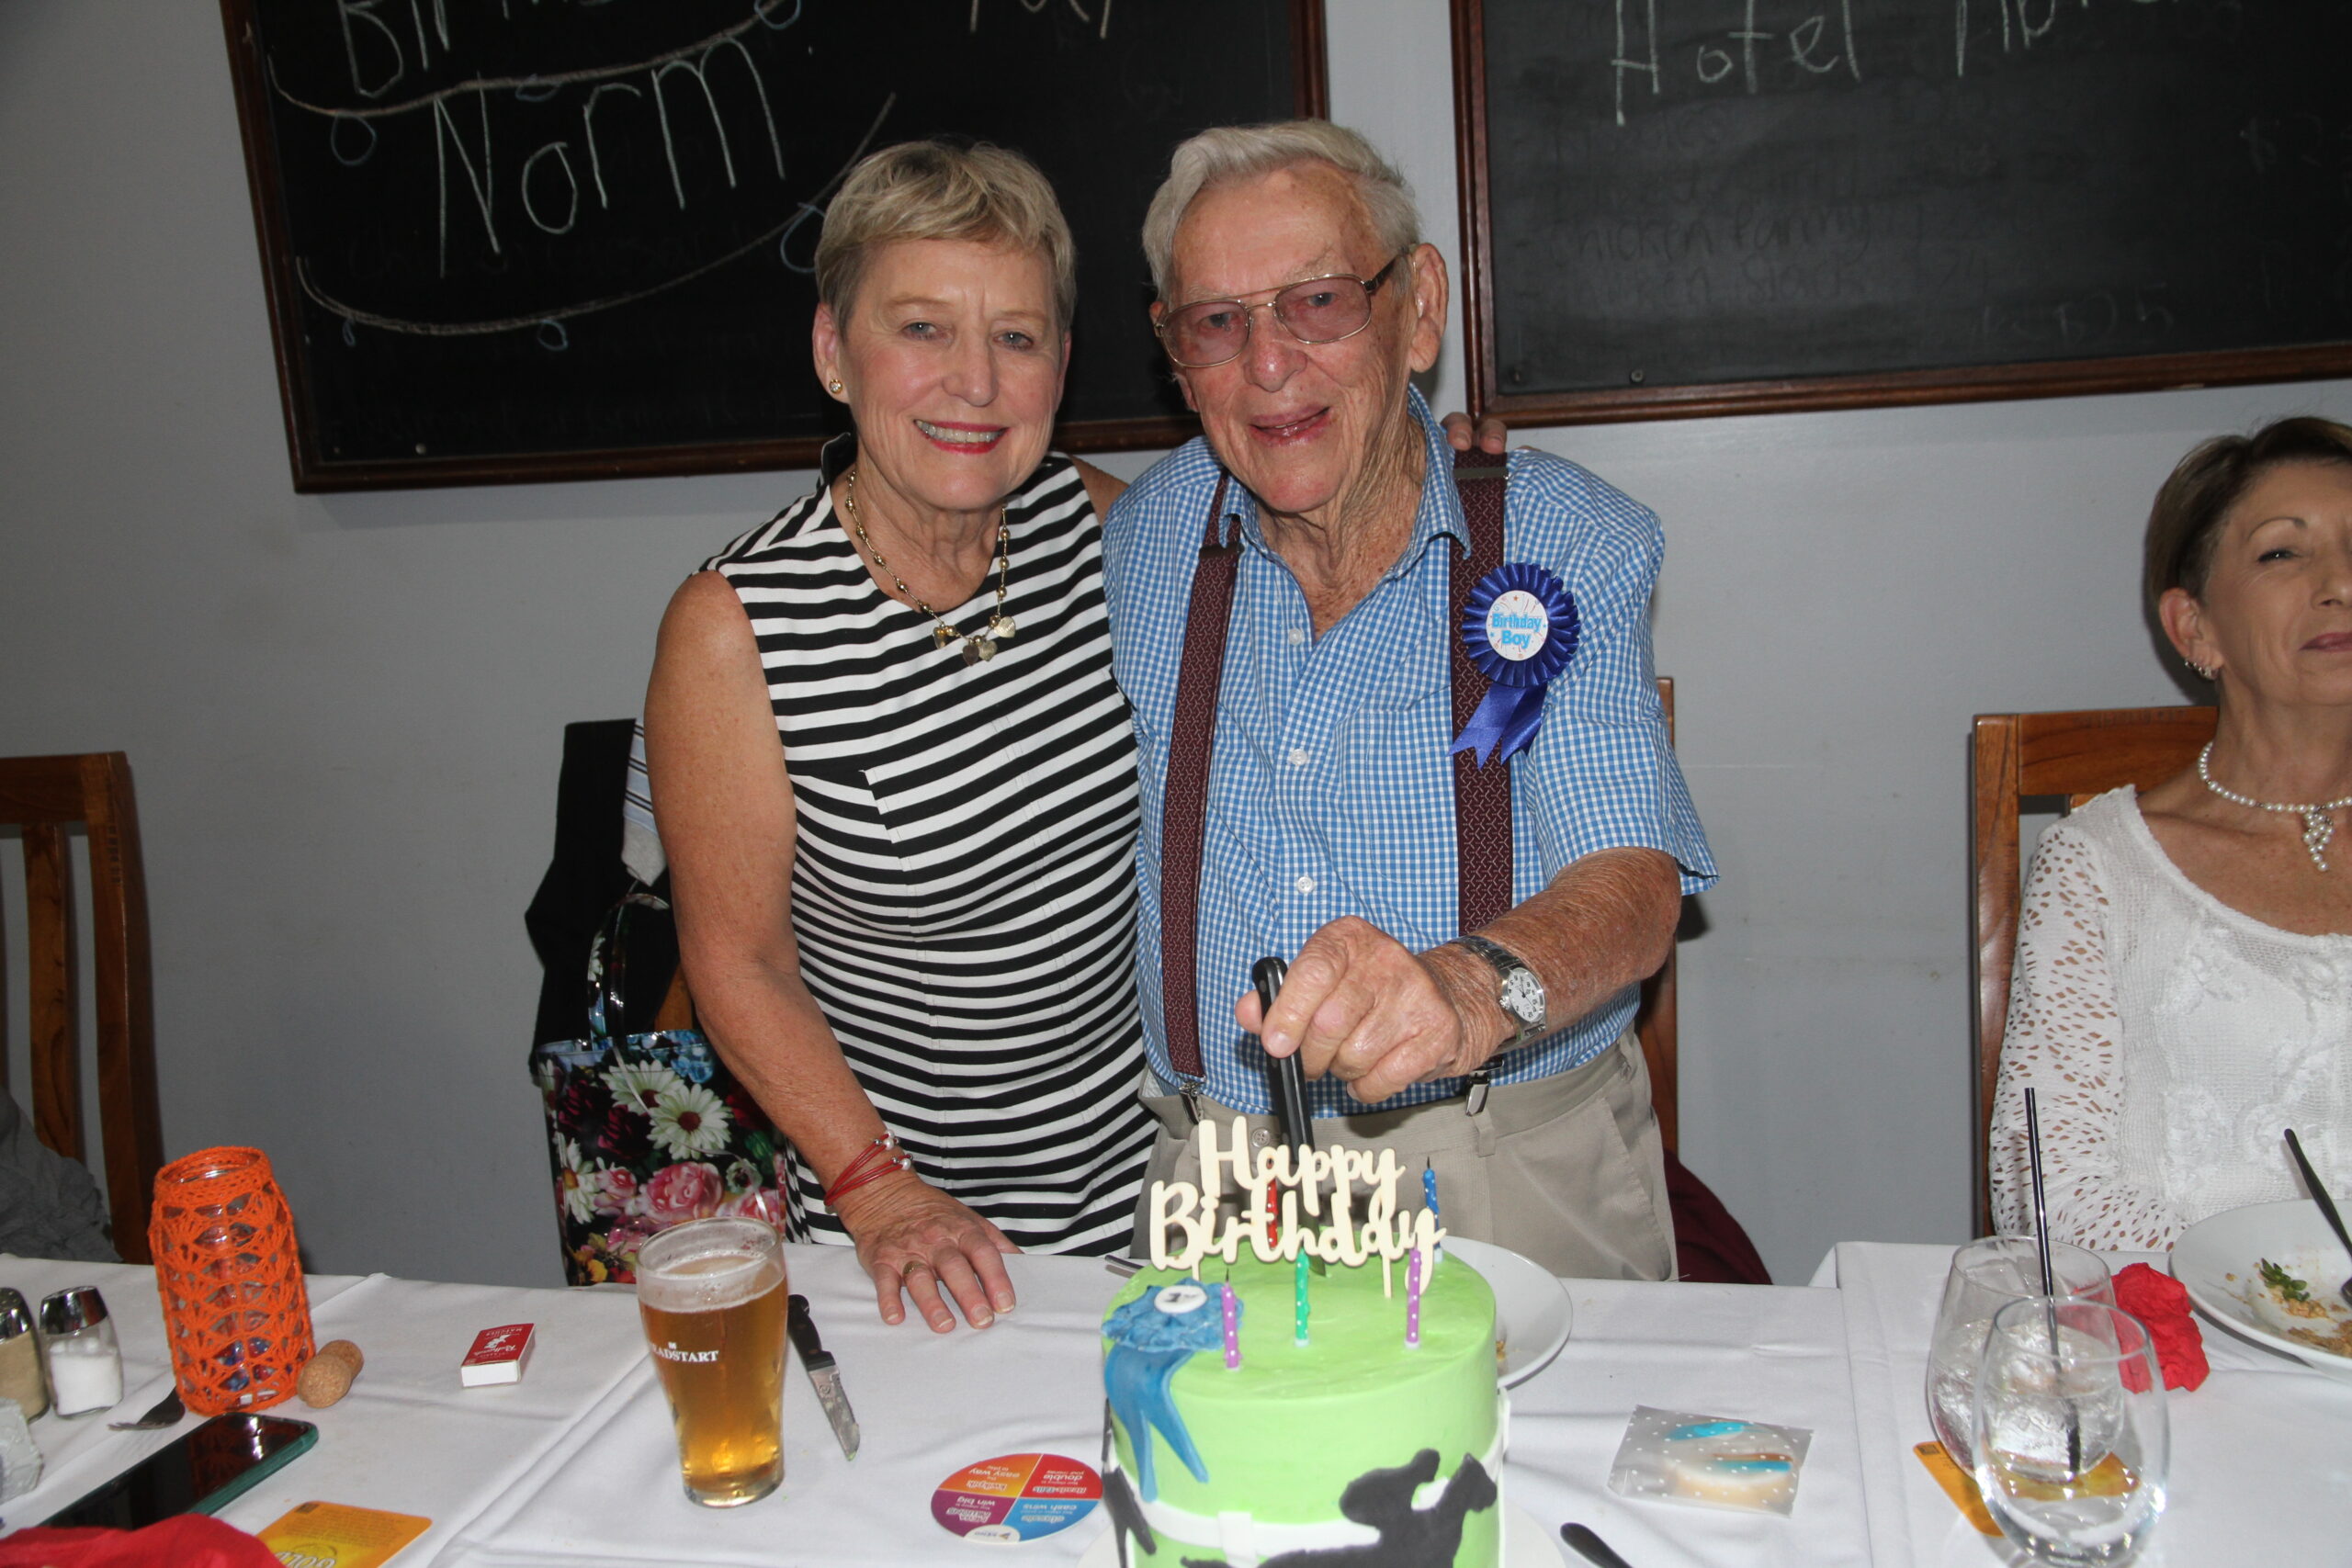 Helen Dugdale and her father Norm Chapman, cutting his 90th birthday cake.